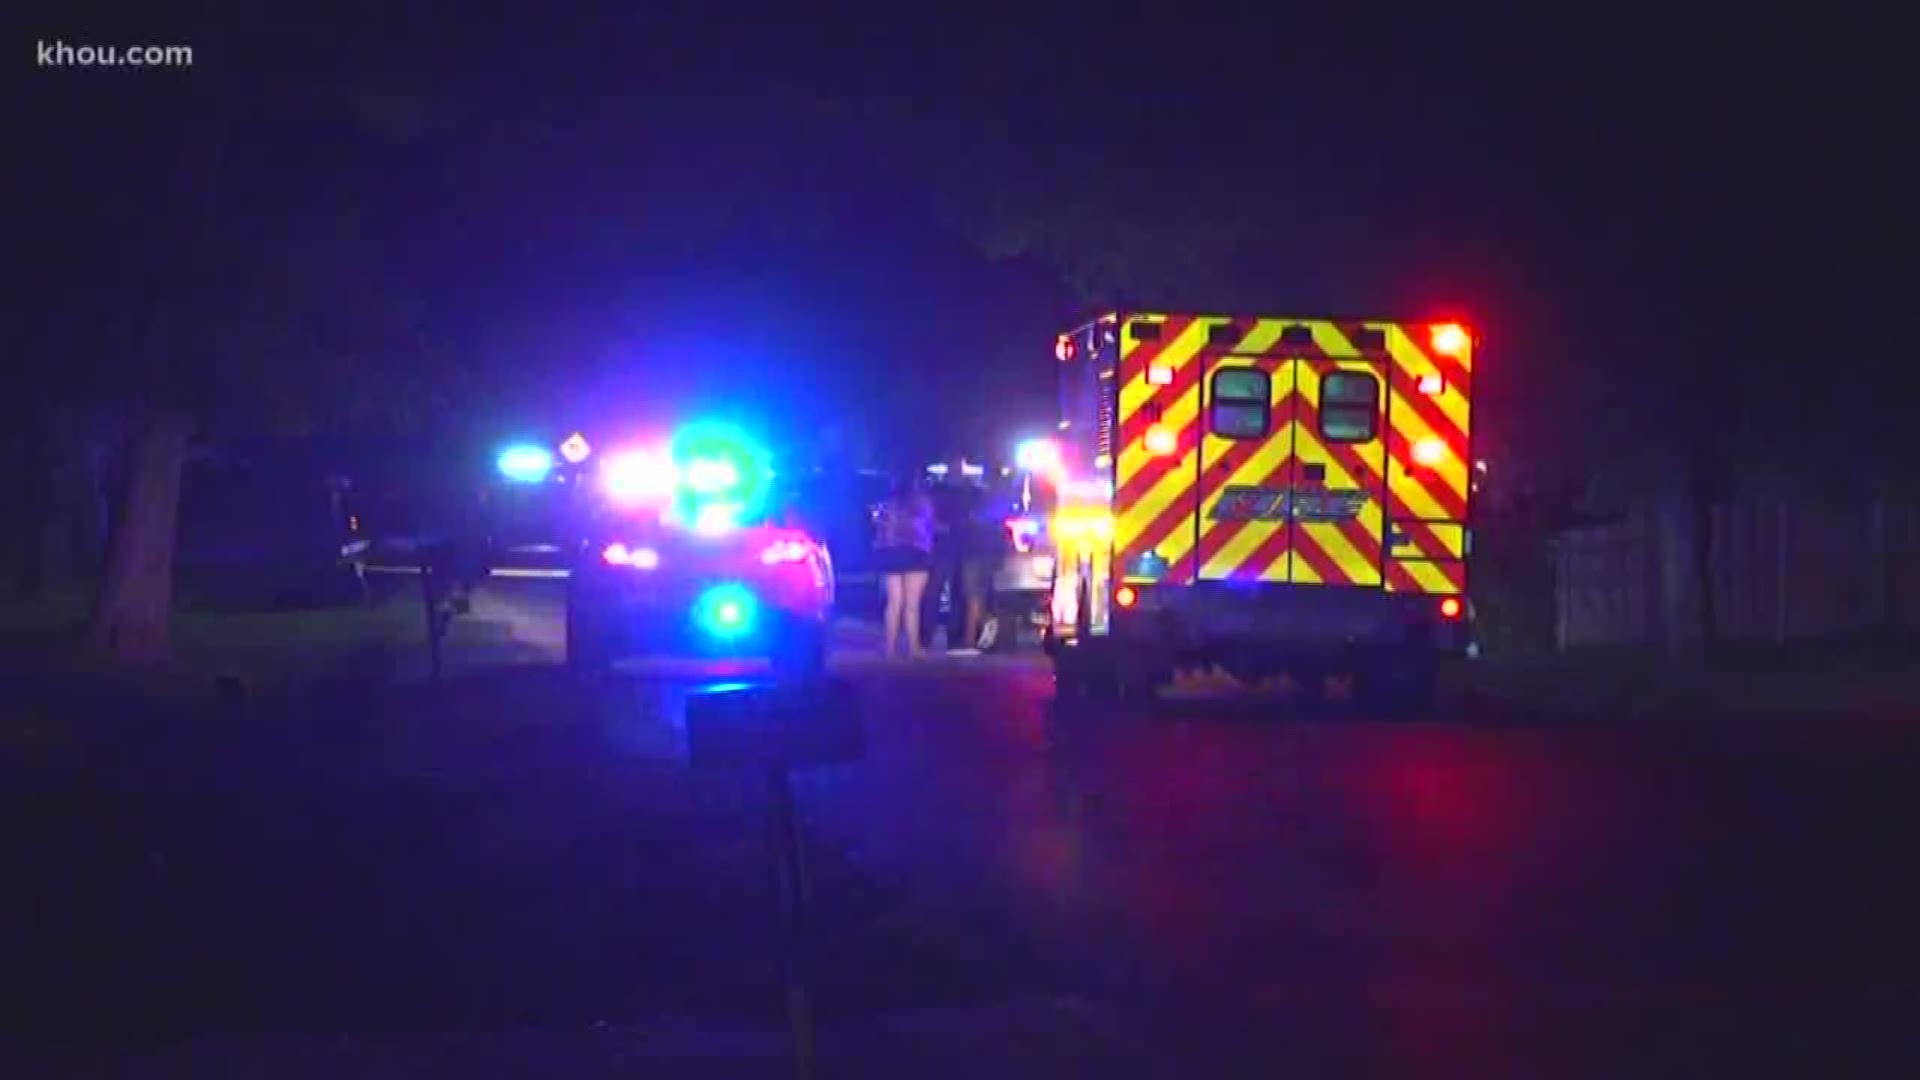 A child was shot and killed in a shooting early Sunday morning in east Harris County, according to Harris County Sheriff Ed Gonzalez.